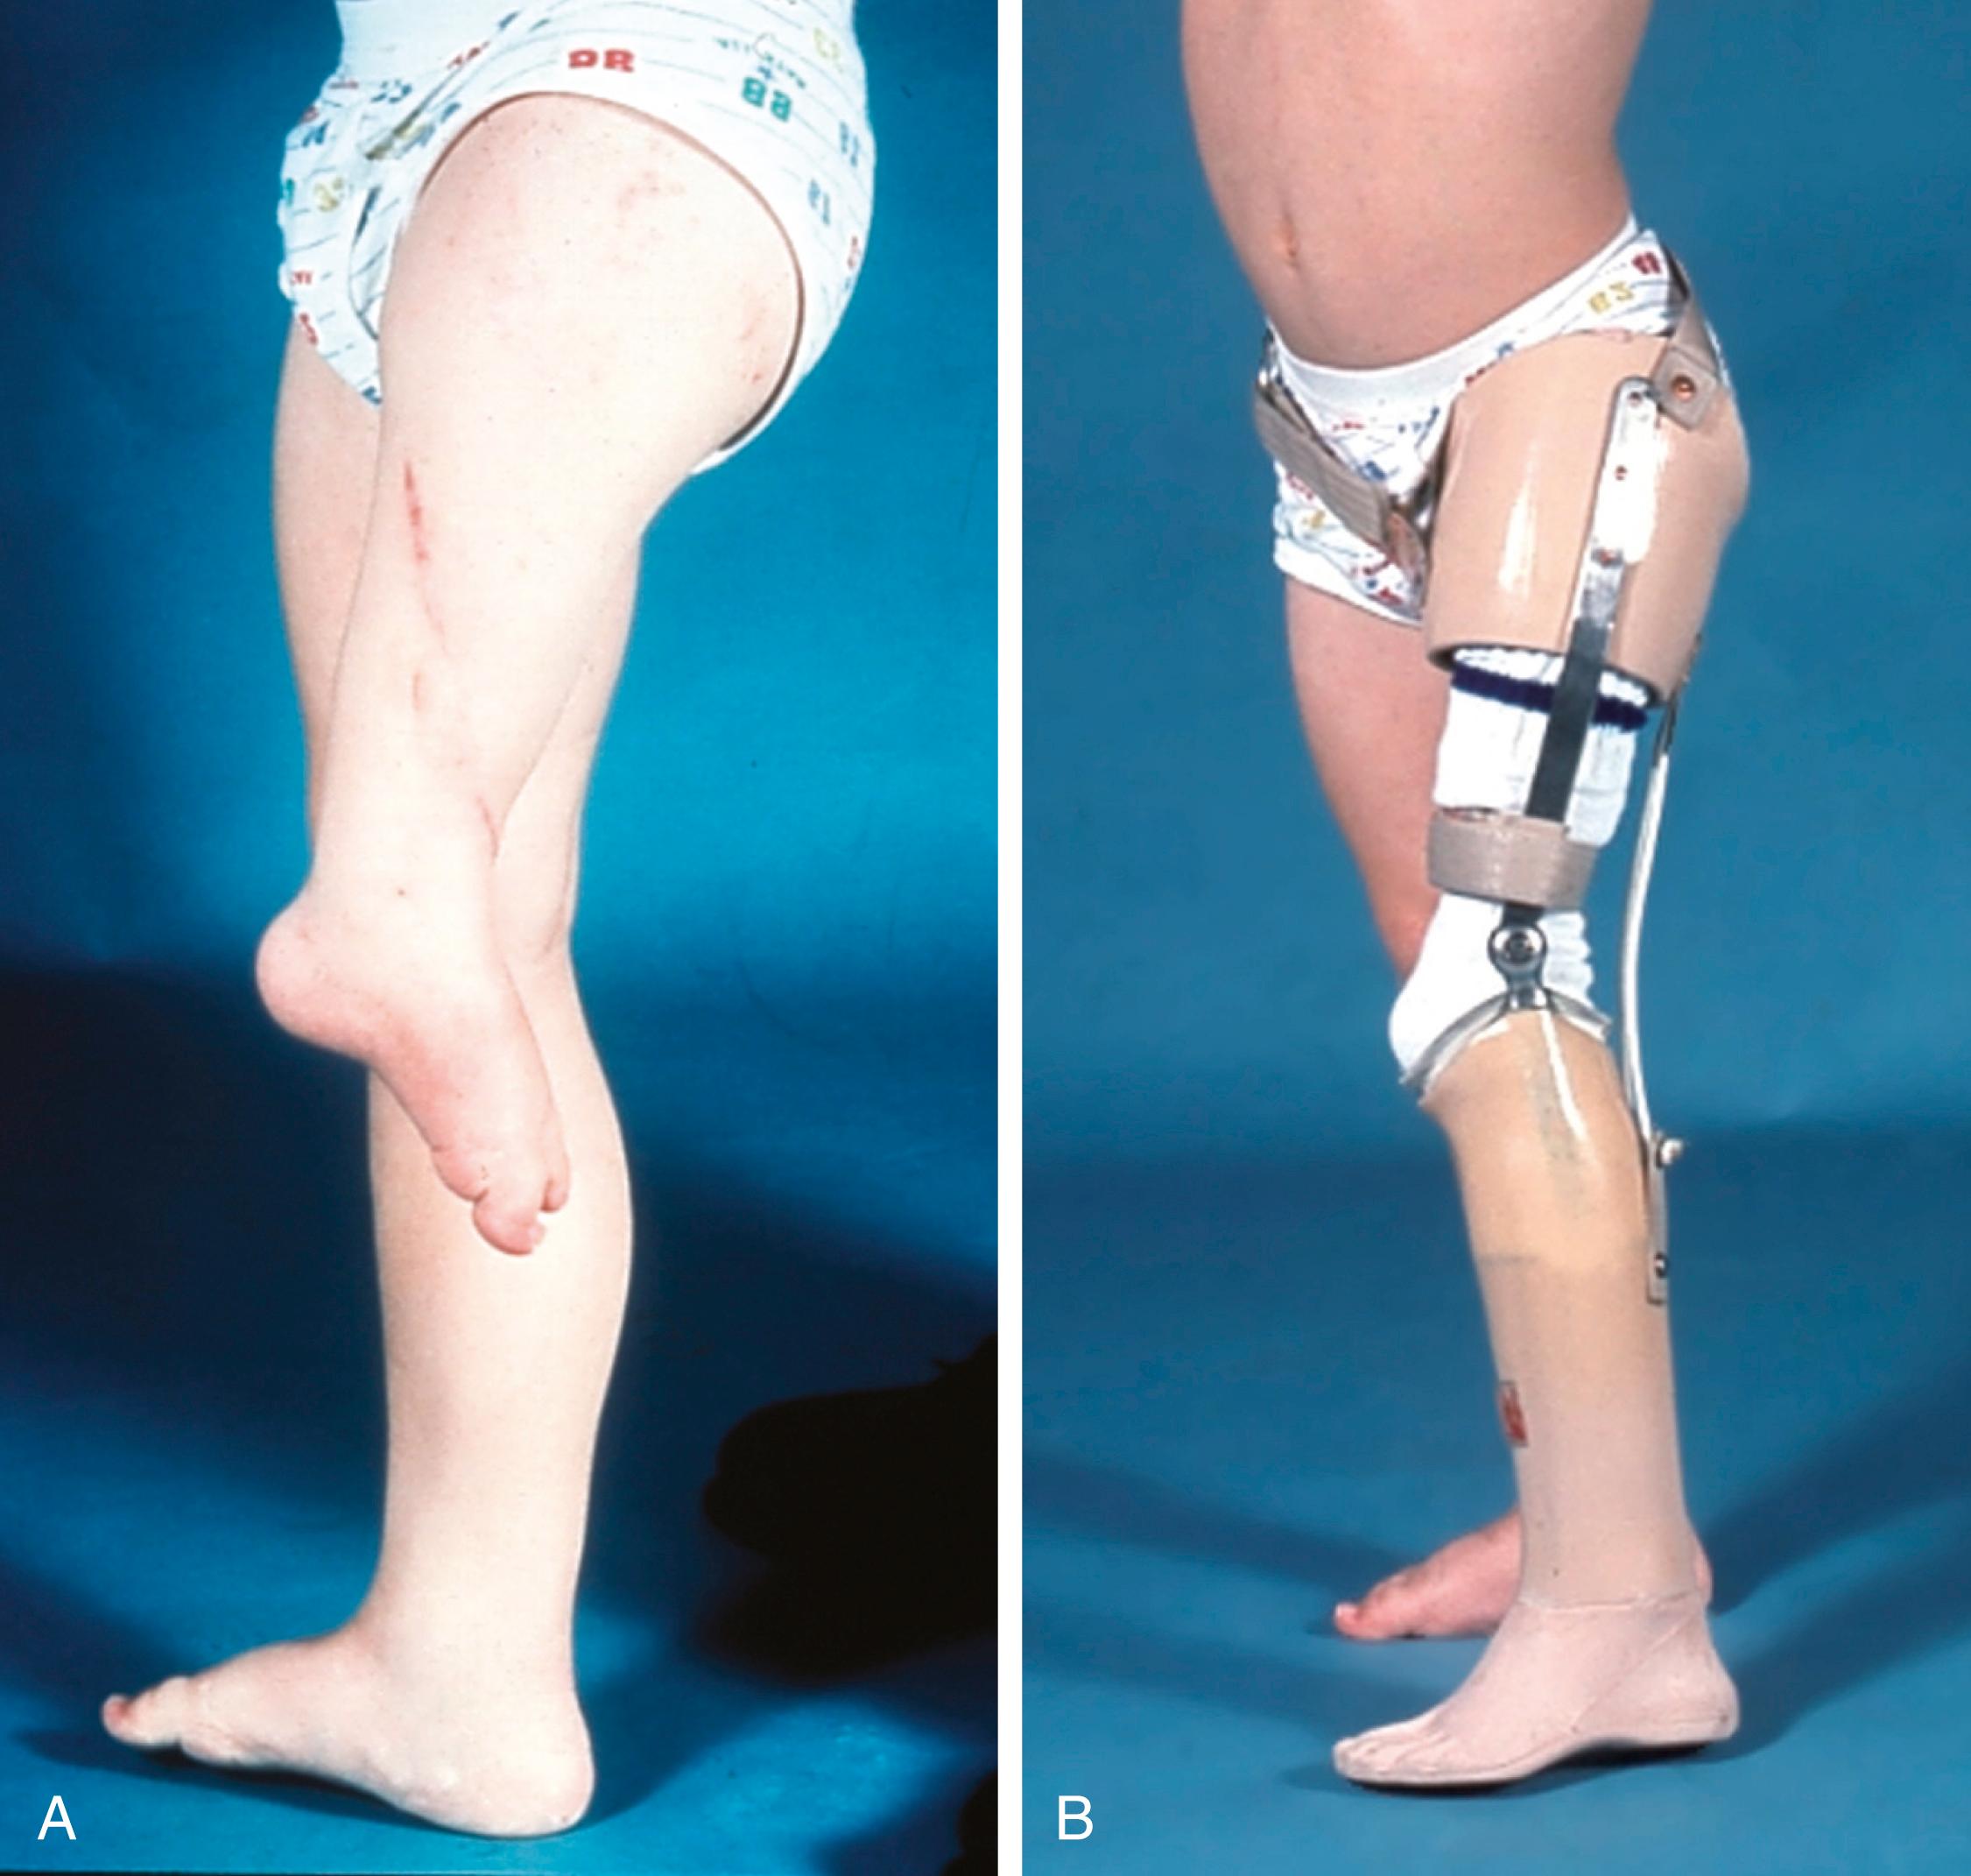 Fig. 21.21, (A) Proximal focal femoral deficiency, which was treated with a van Nes rotationplasty. (B) The ankle provides motor and sensory control of the prosthetic knee.